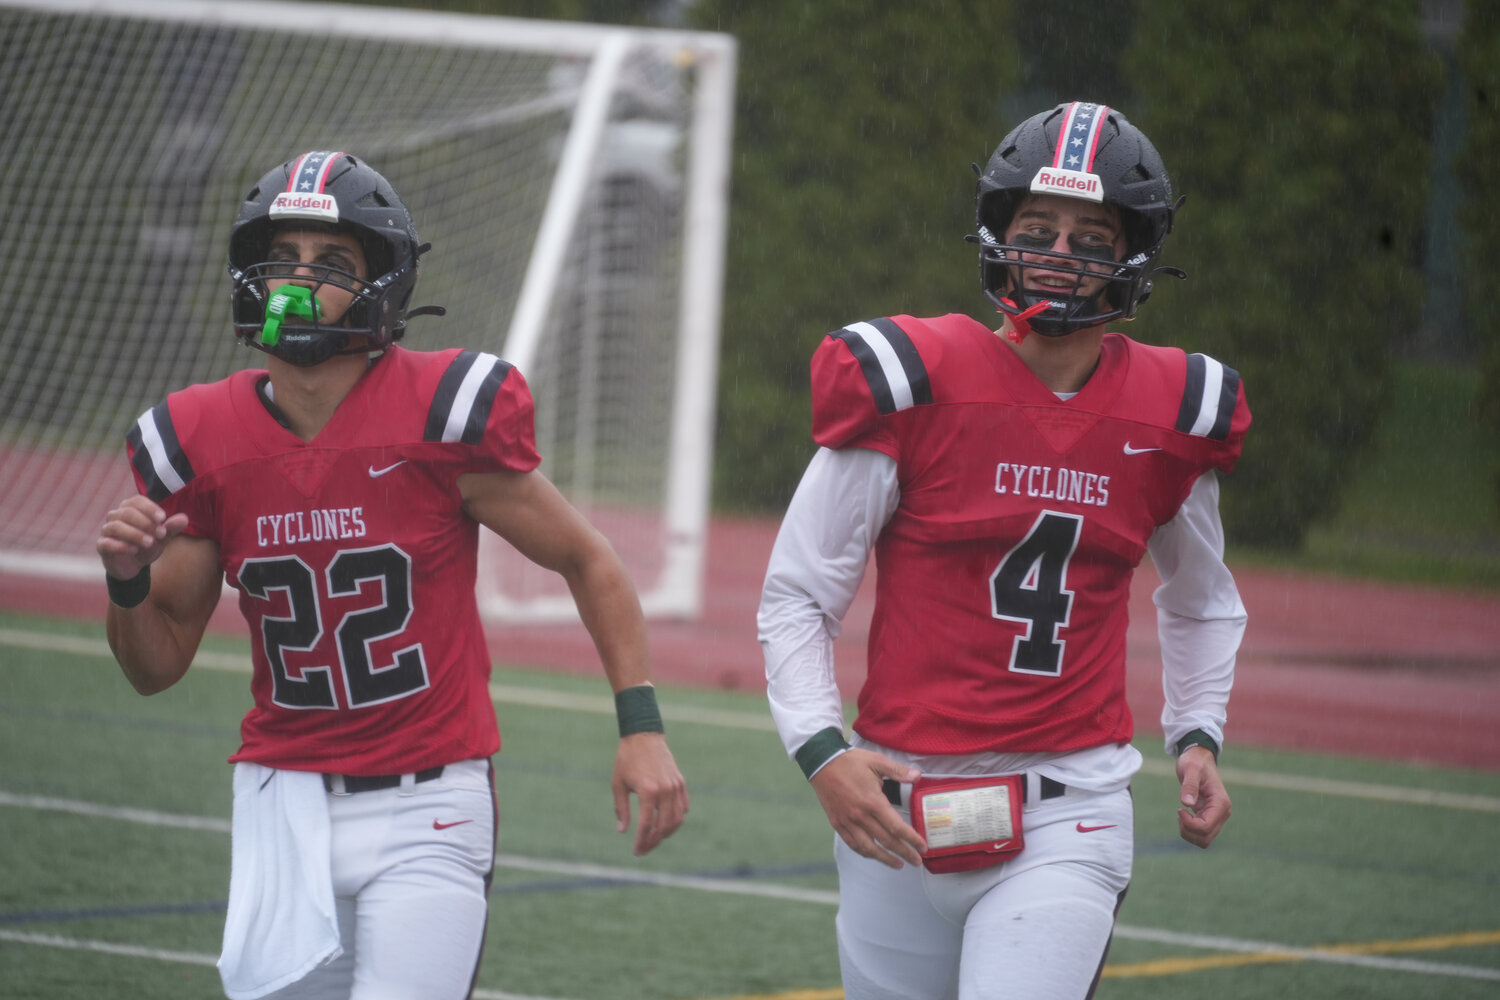 Wide receiver Michael Melkonian (22) and quarterback Owen West (4) celebrating a dominating win over Mineola, 56-0.